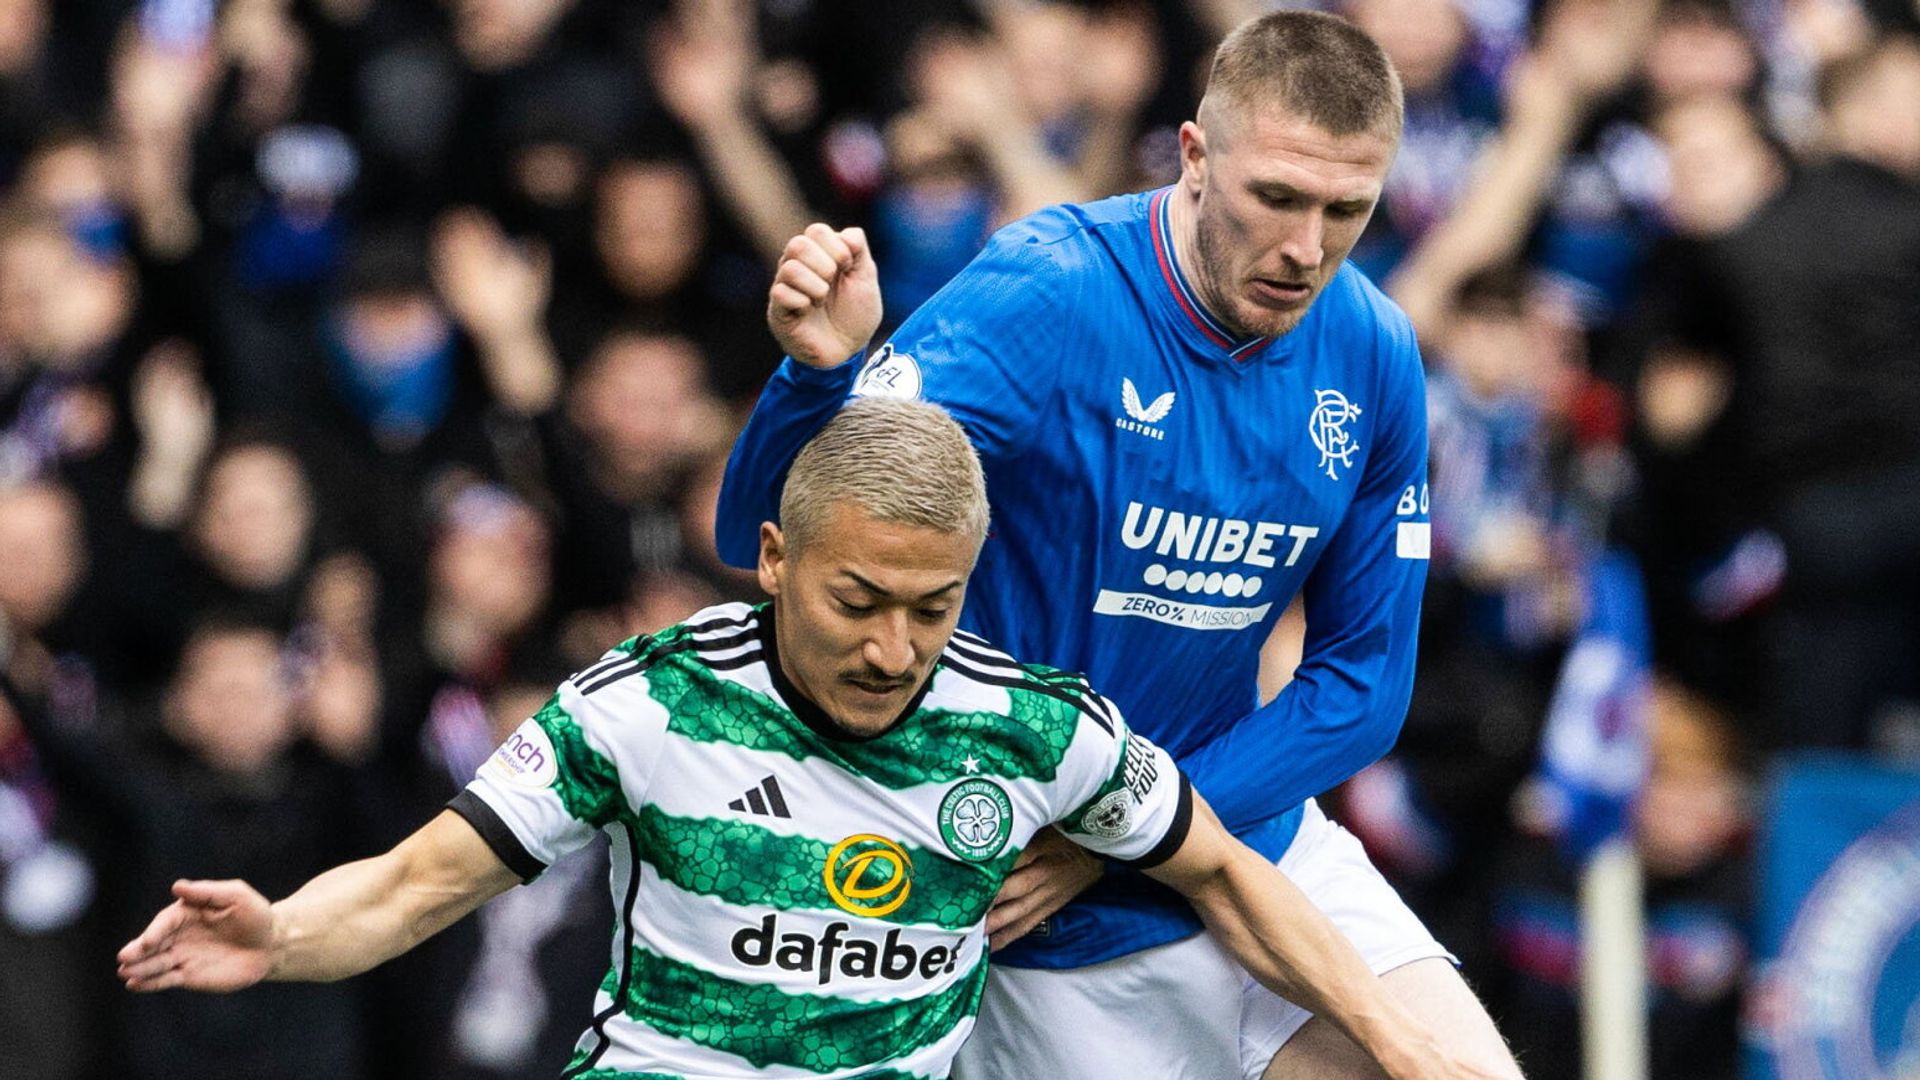 Old Firm: Pick your starting XI for Celtic or Rangers